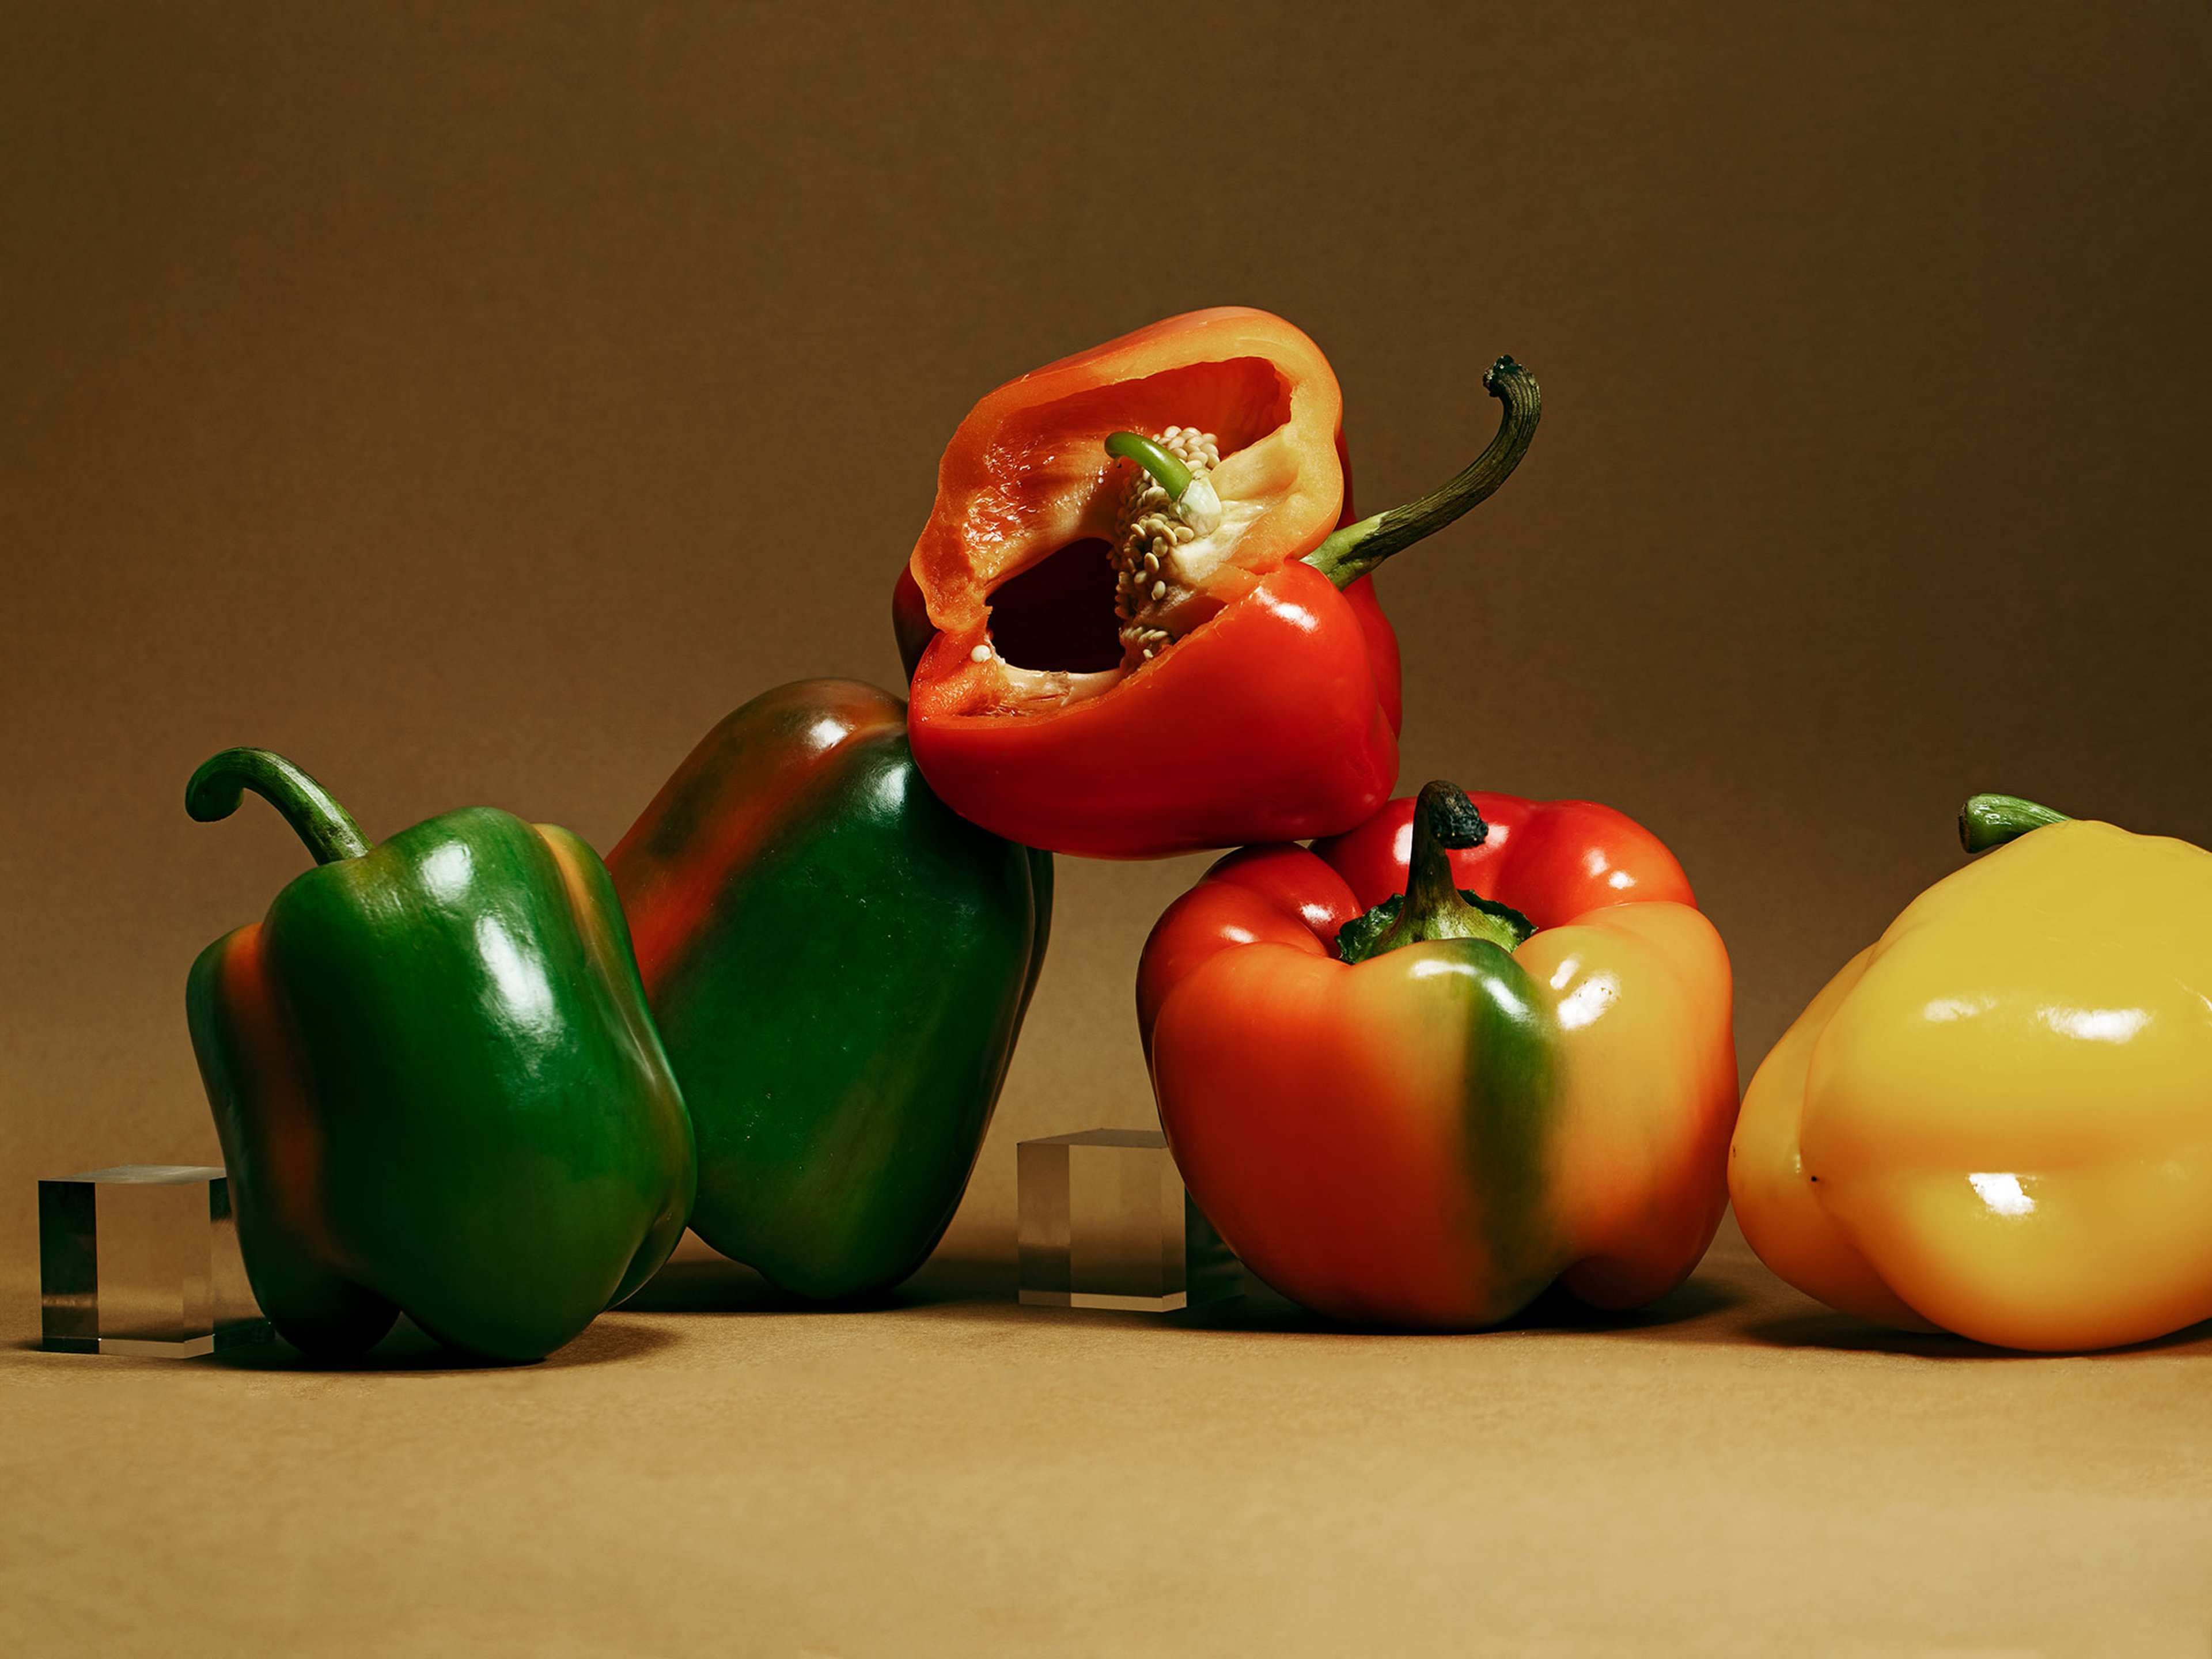 Now in Season: Buying, Storing, and Preparing Bell Pepper Properly